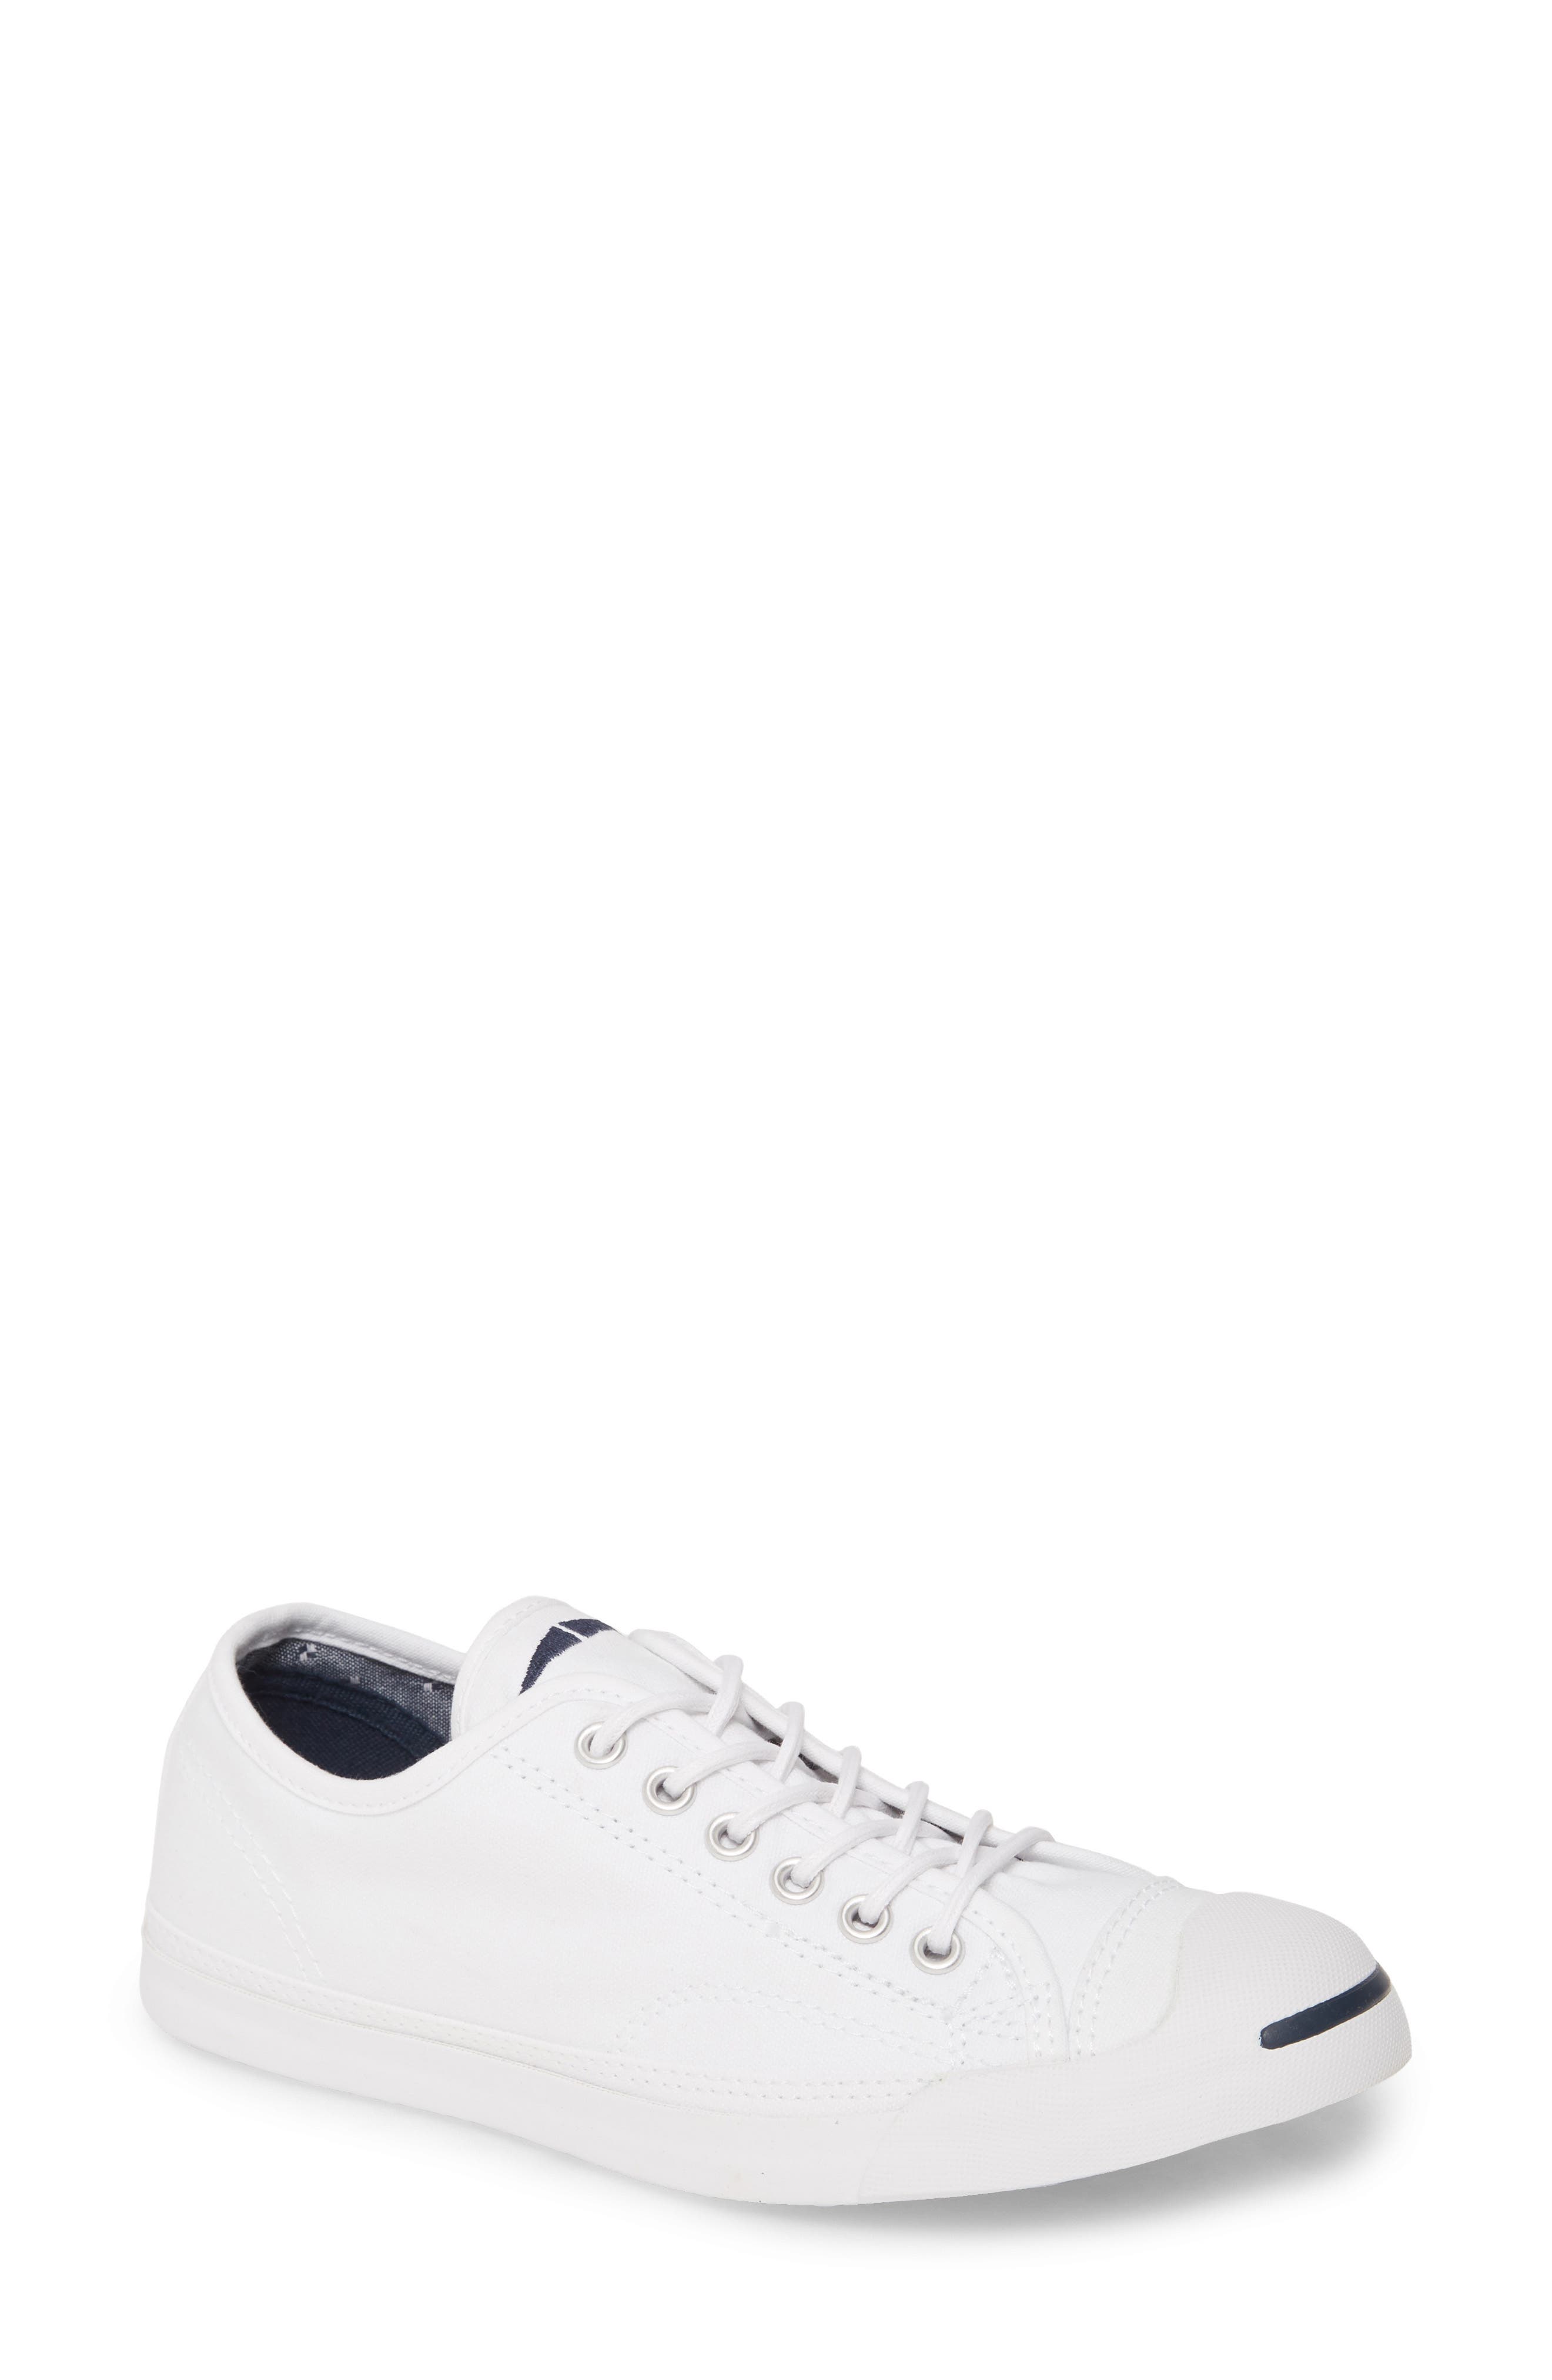 Shop - nordstrom converse jack purcell 